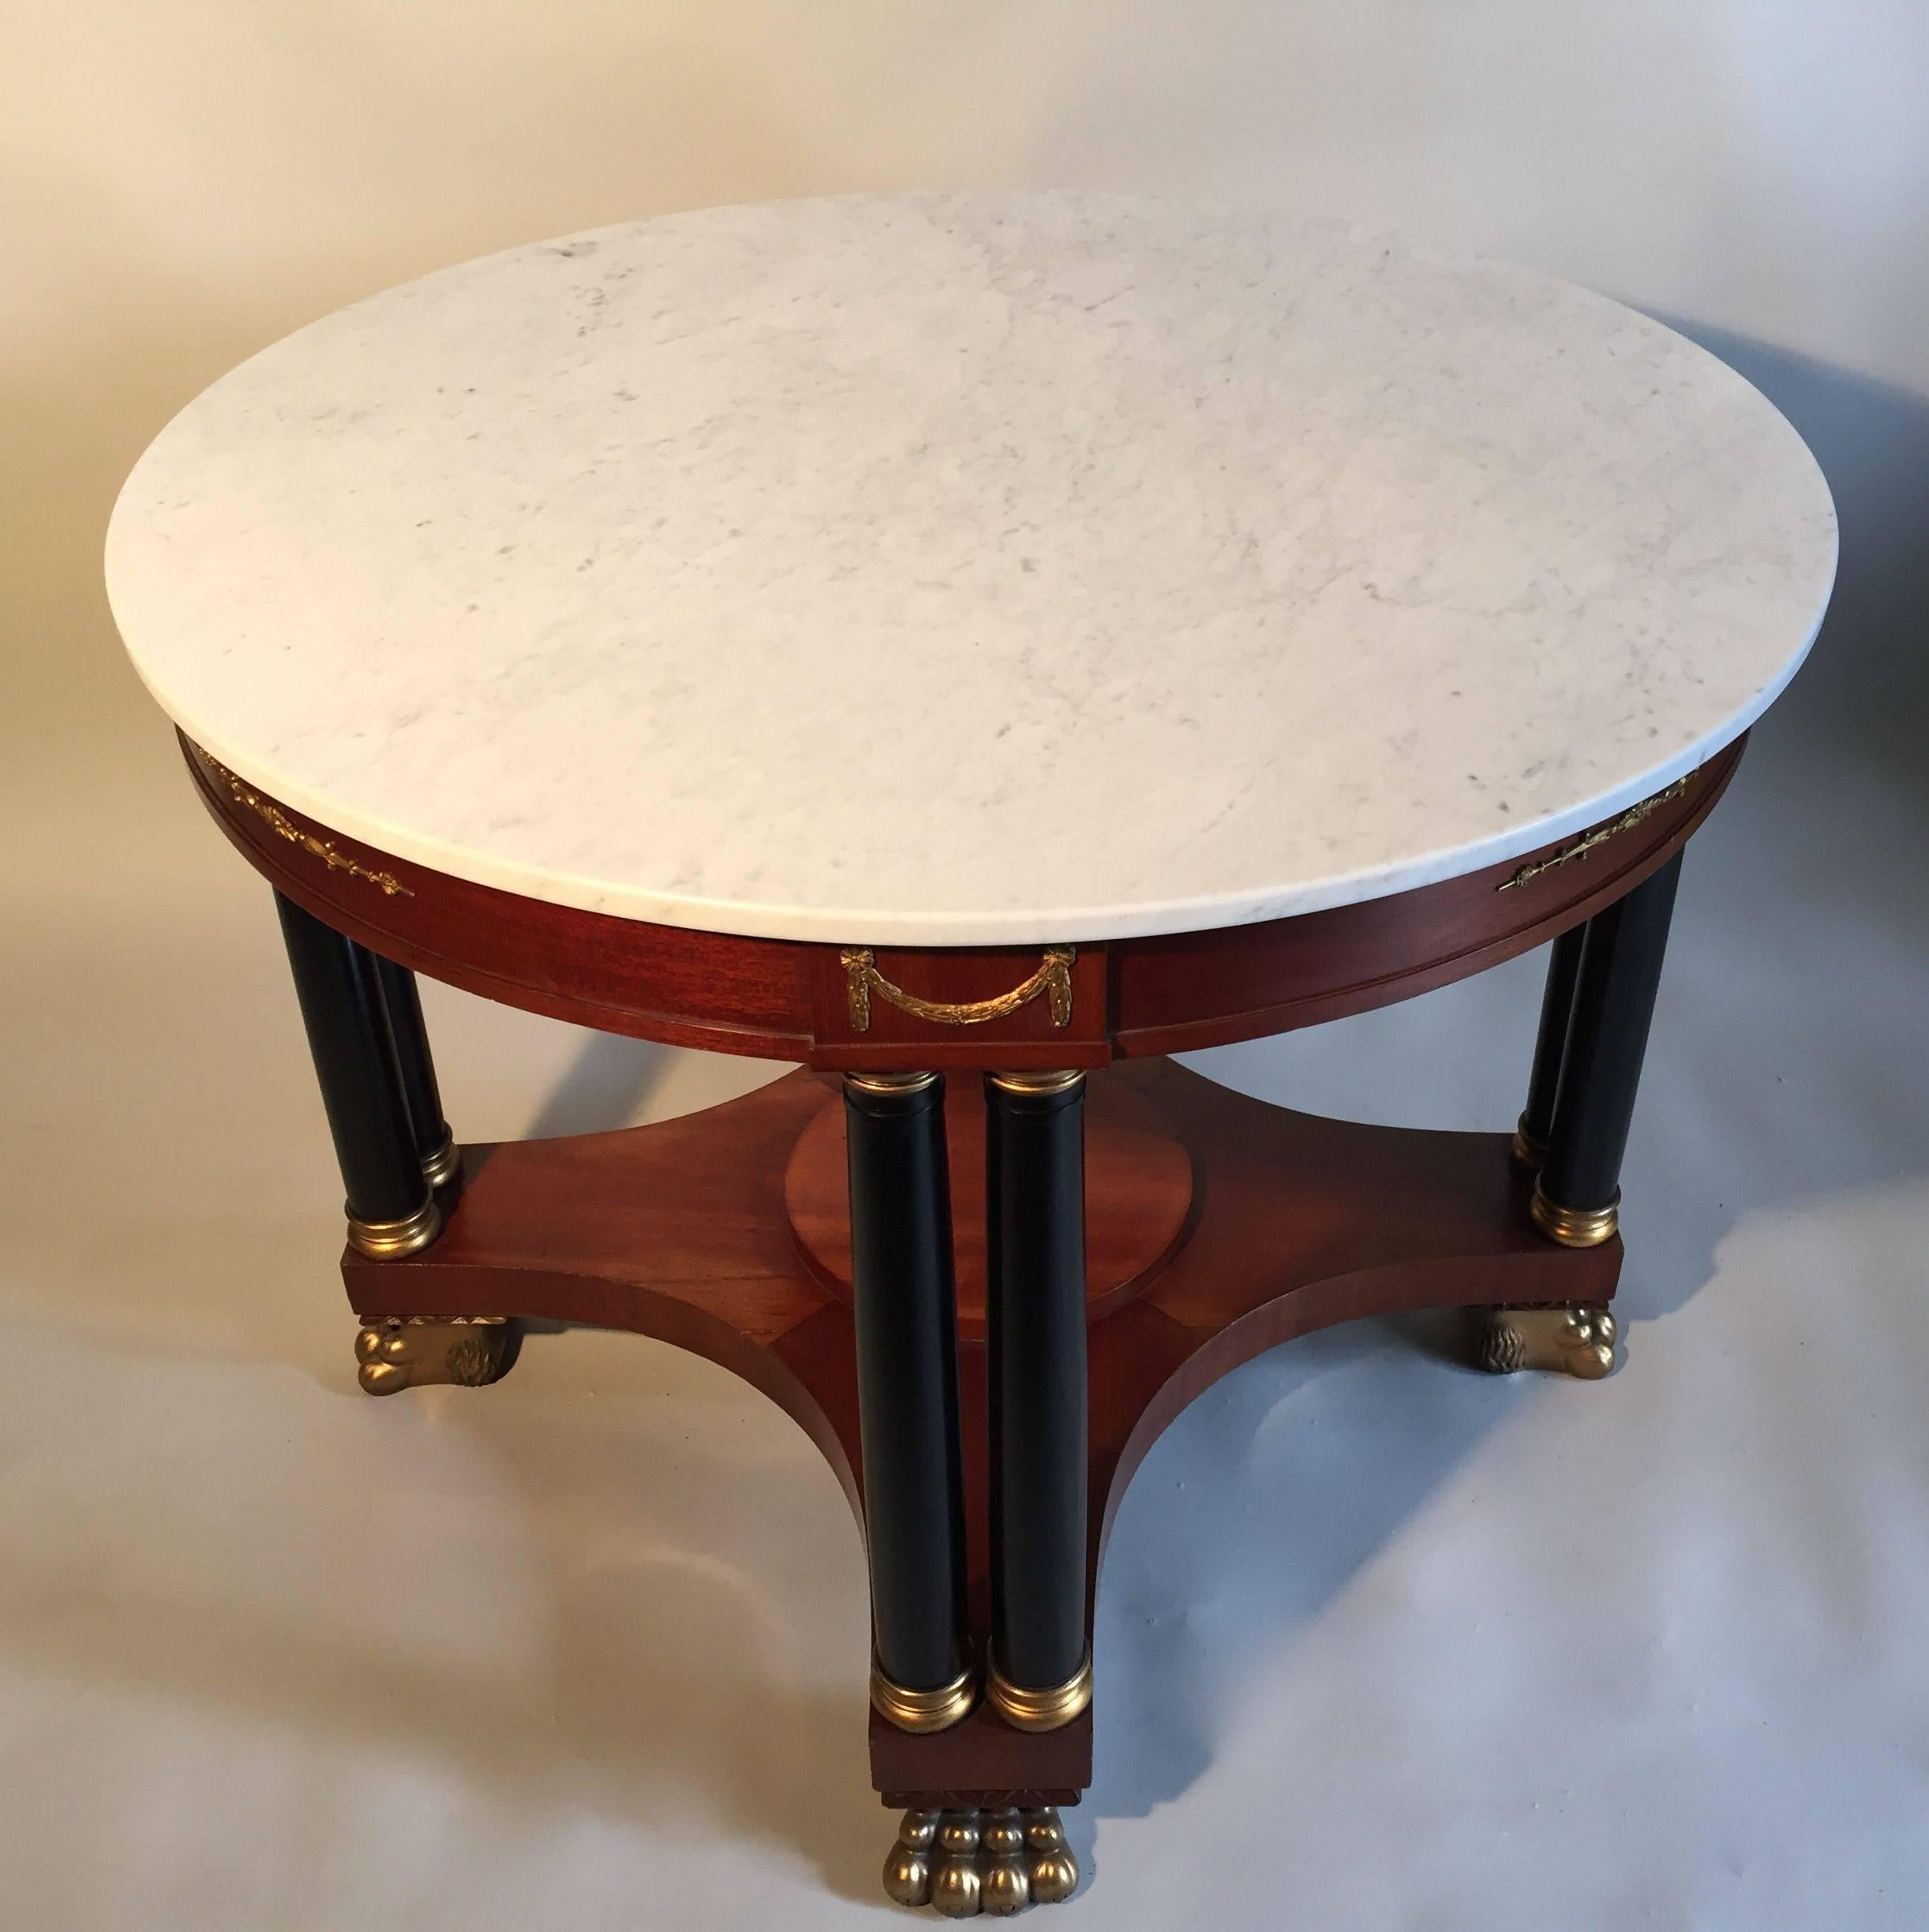 An exceptional mahogany centre table with ormolu mounts and gilded hand-carved lions paw feet. Carrara marble-top is supported by ebonized columns. Original makers label on underside. Made by Axel Beckman, Sweden.